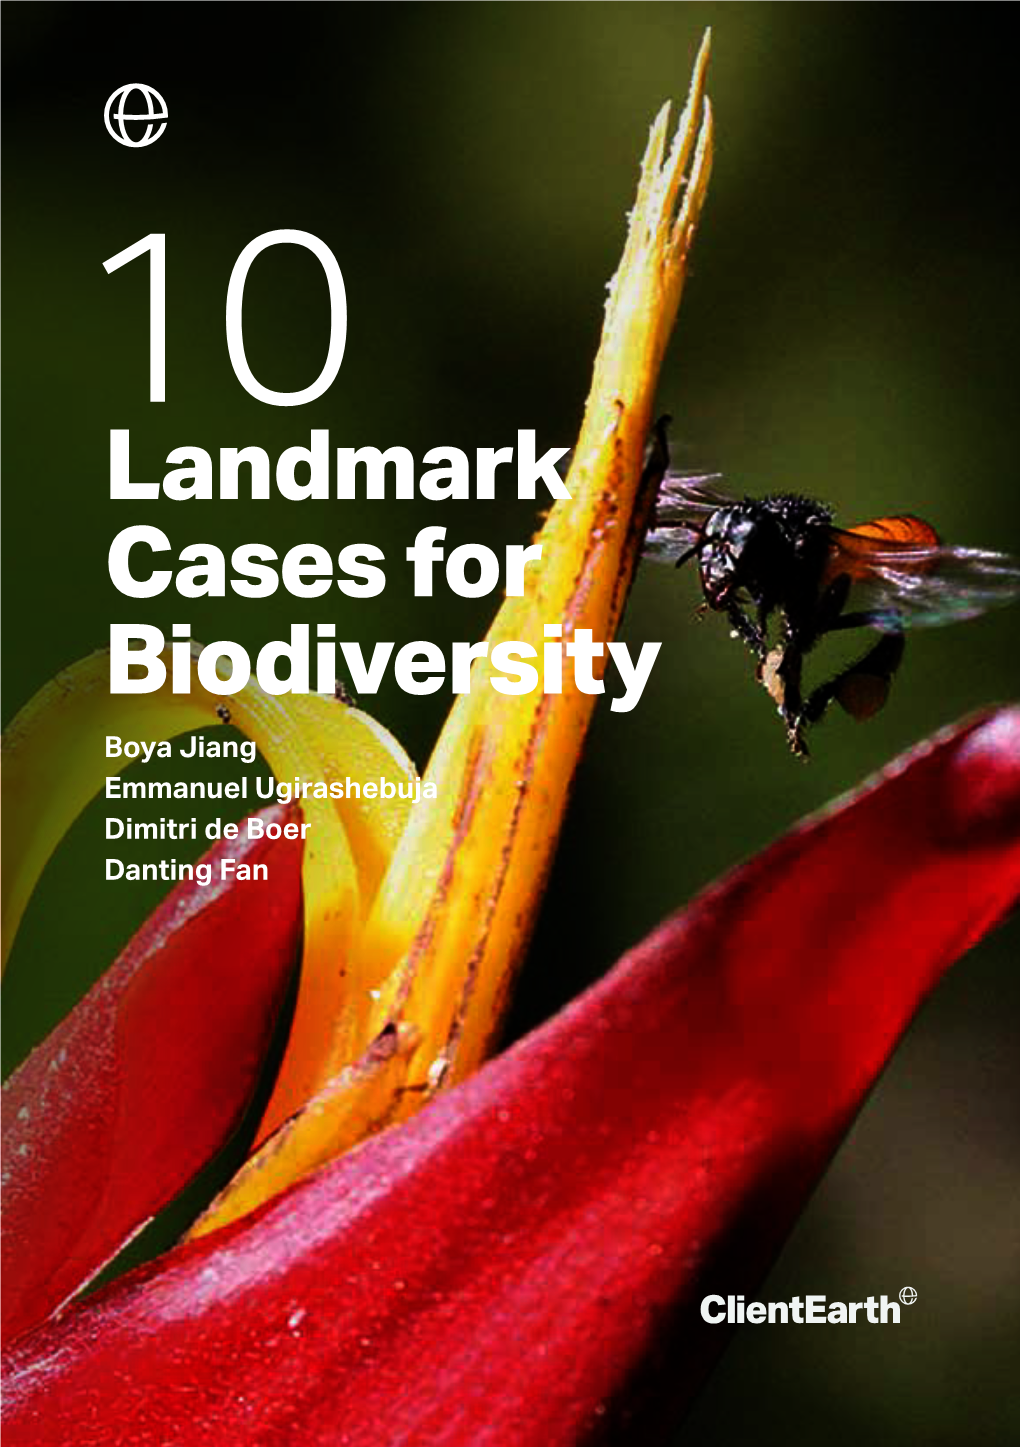 Ten Landmark Cases for Biodiversity from Loss, and Learn to Live in Harmony with Around the World